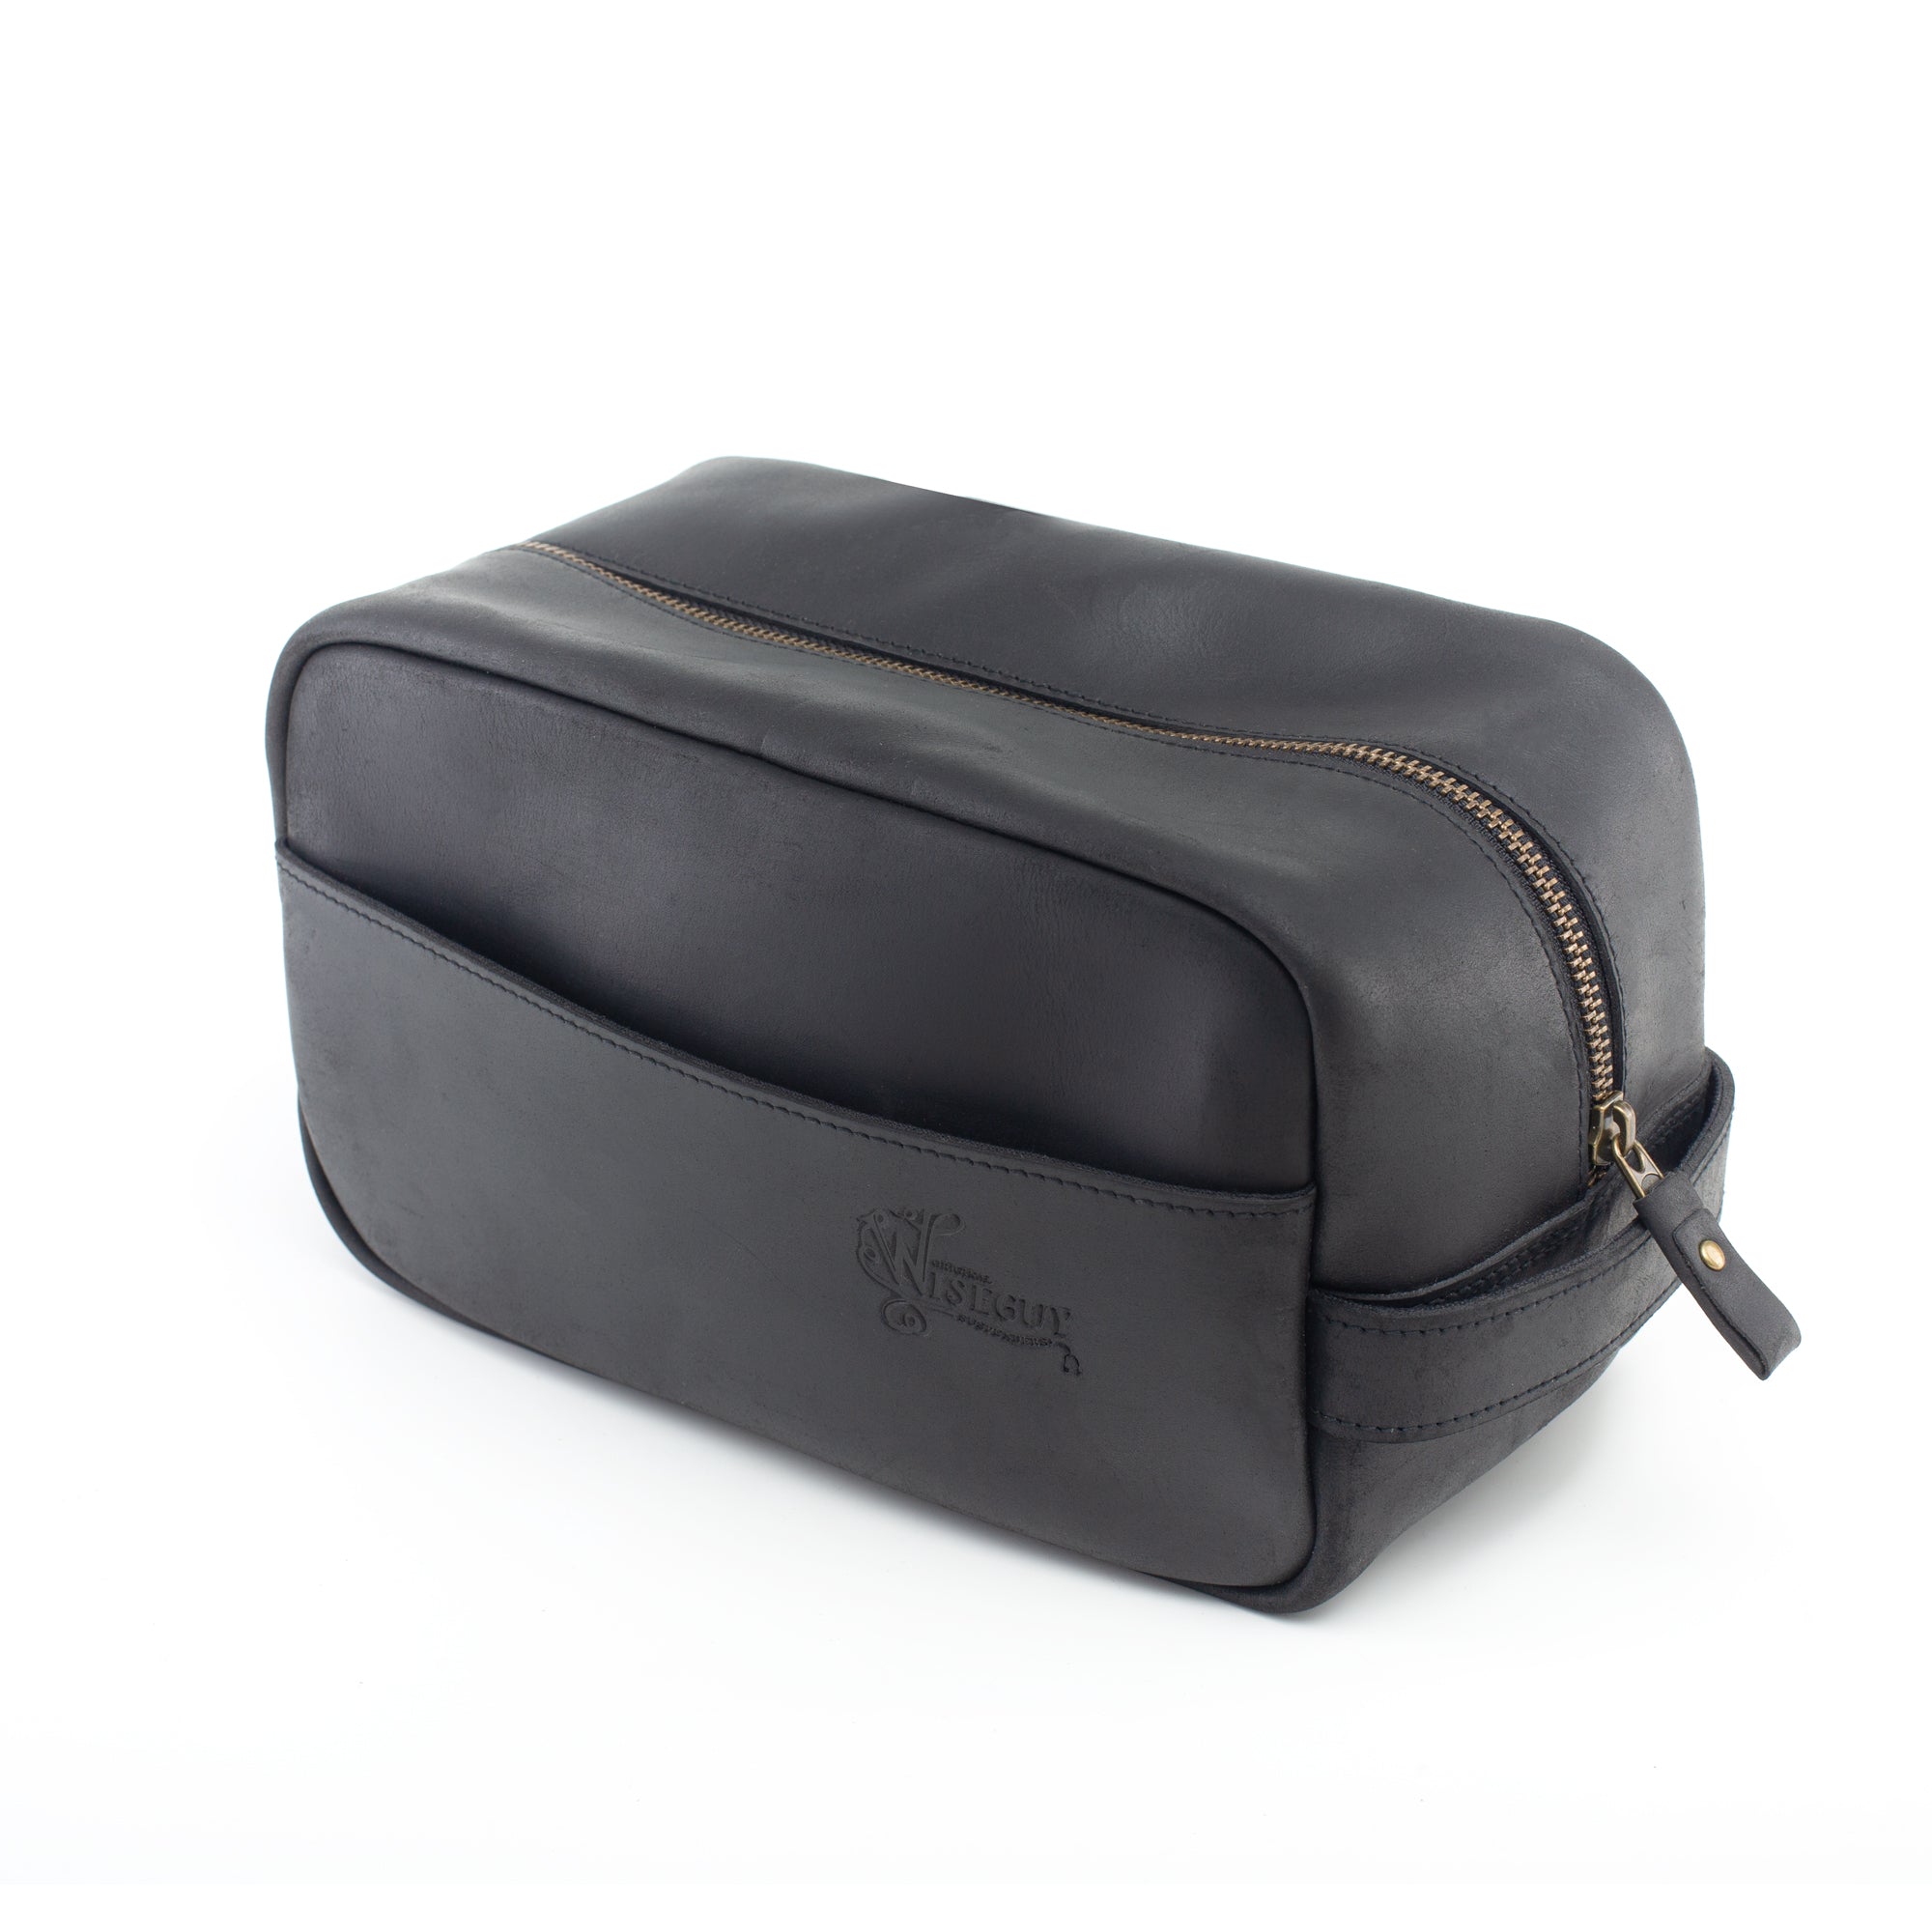 Wiseguy Original Toiletry Bag Leather No. A8210